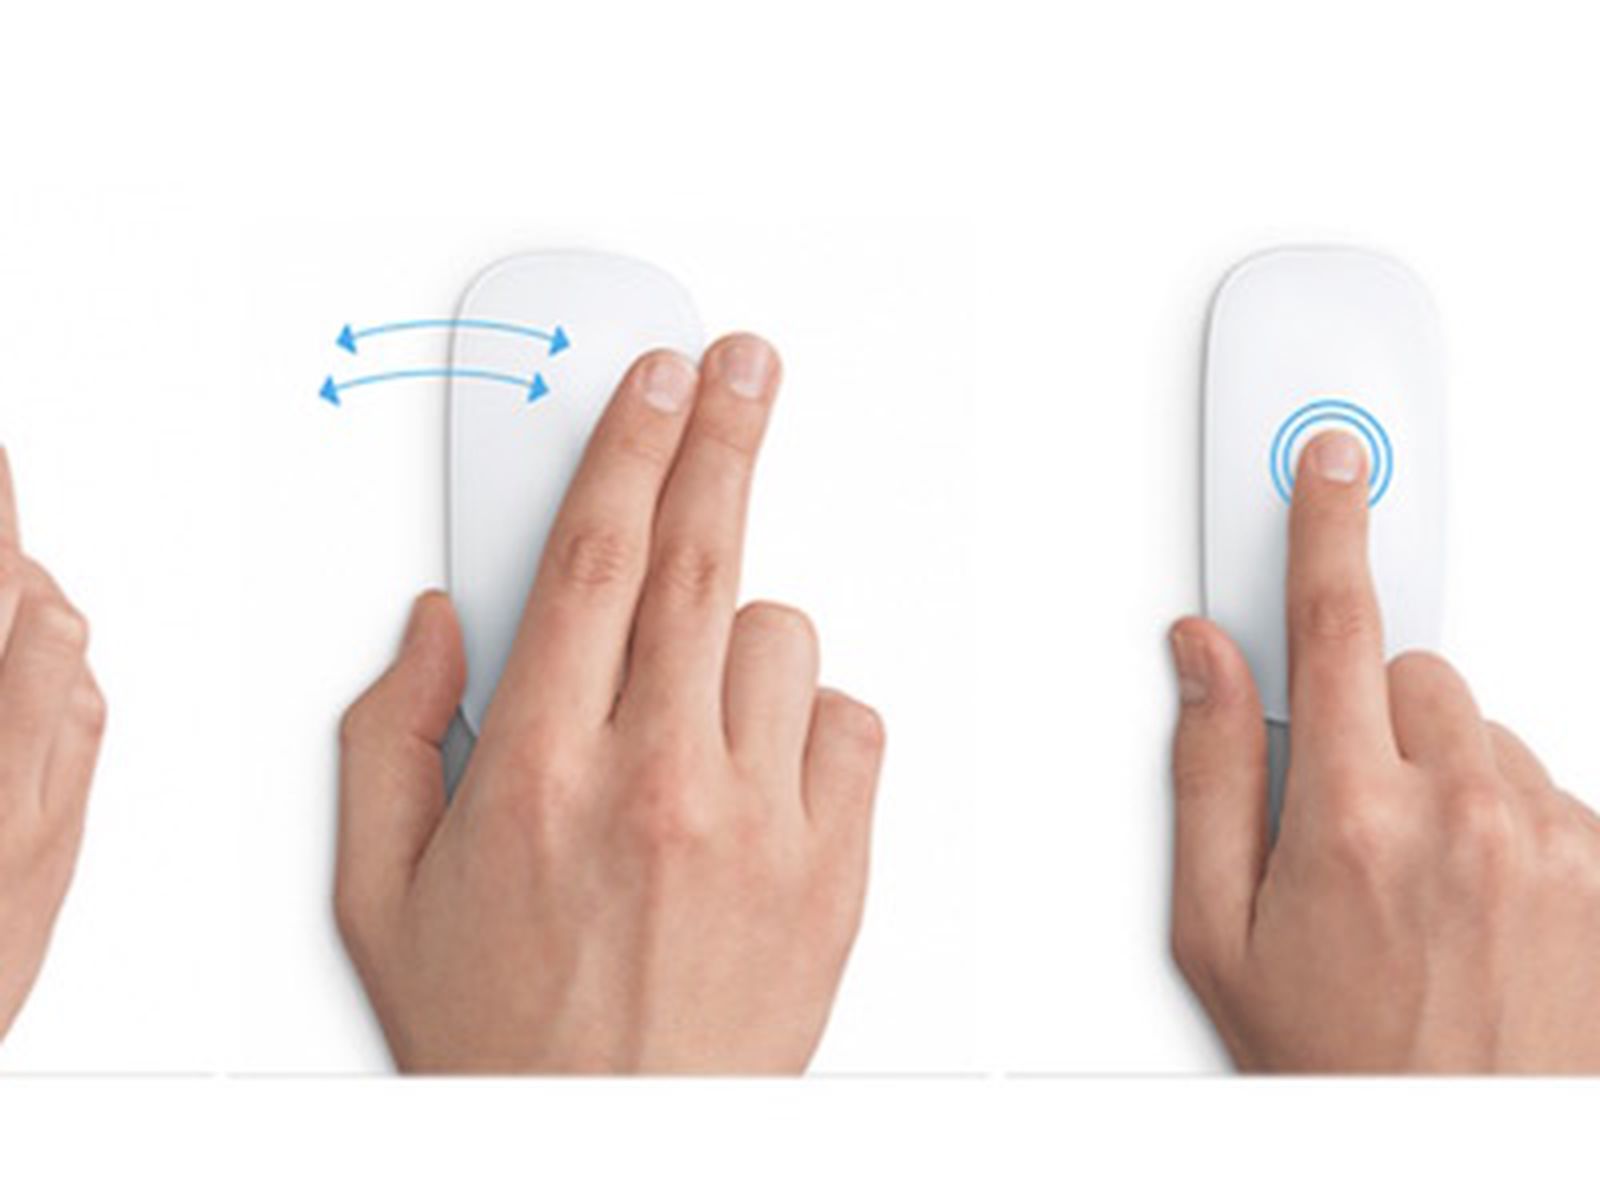 how to use apple mouse right click